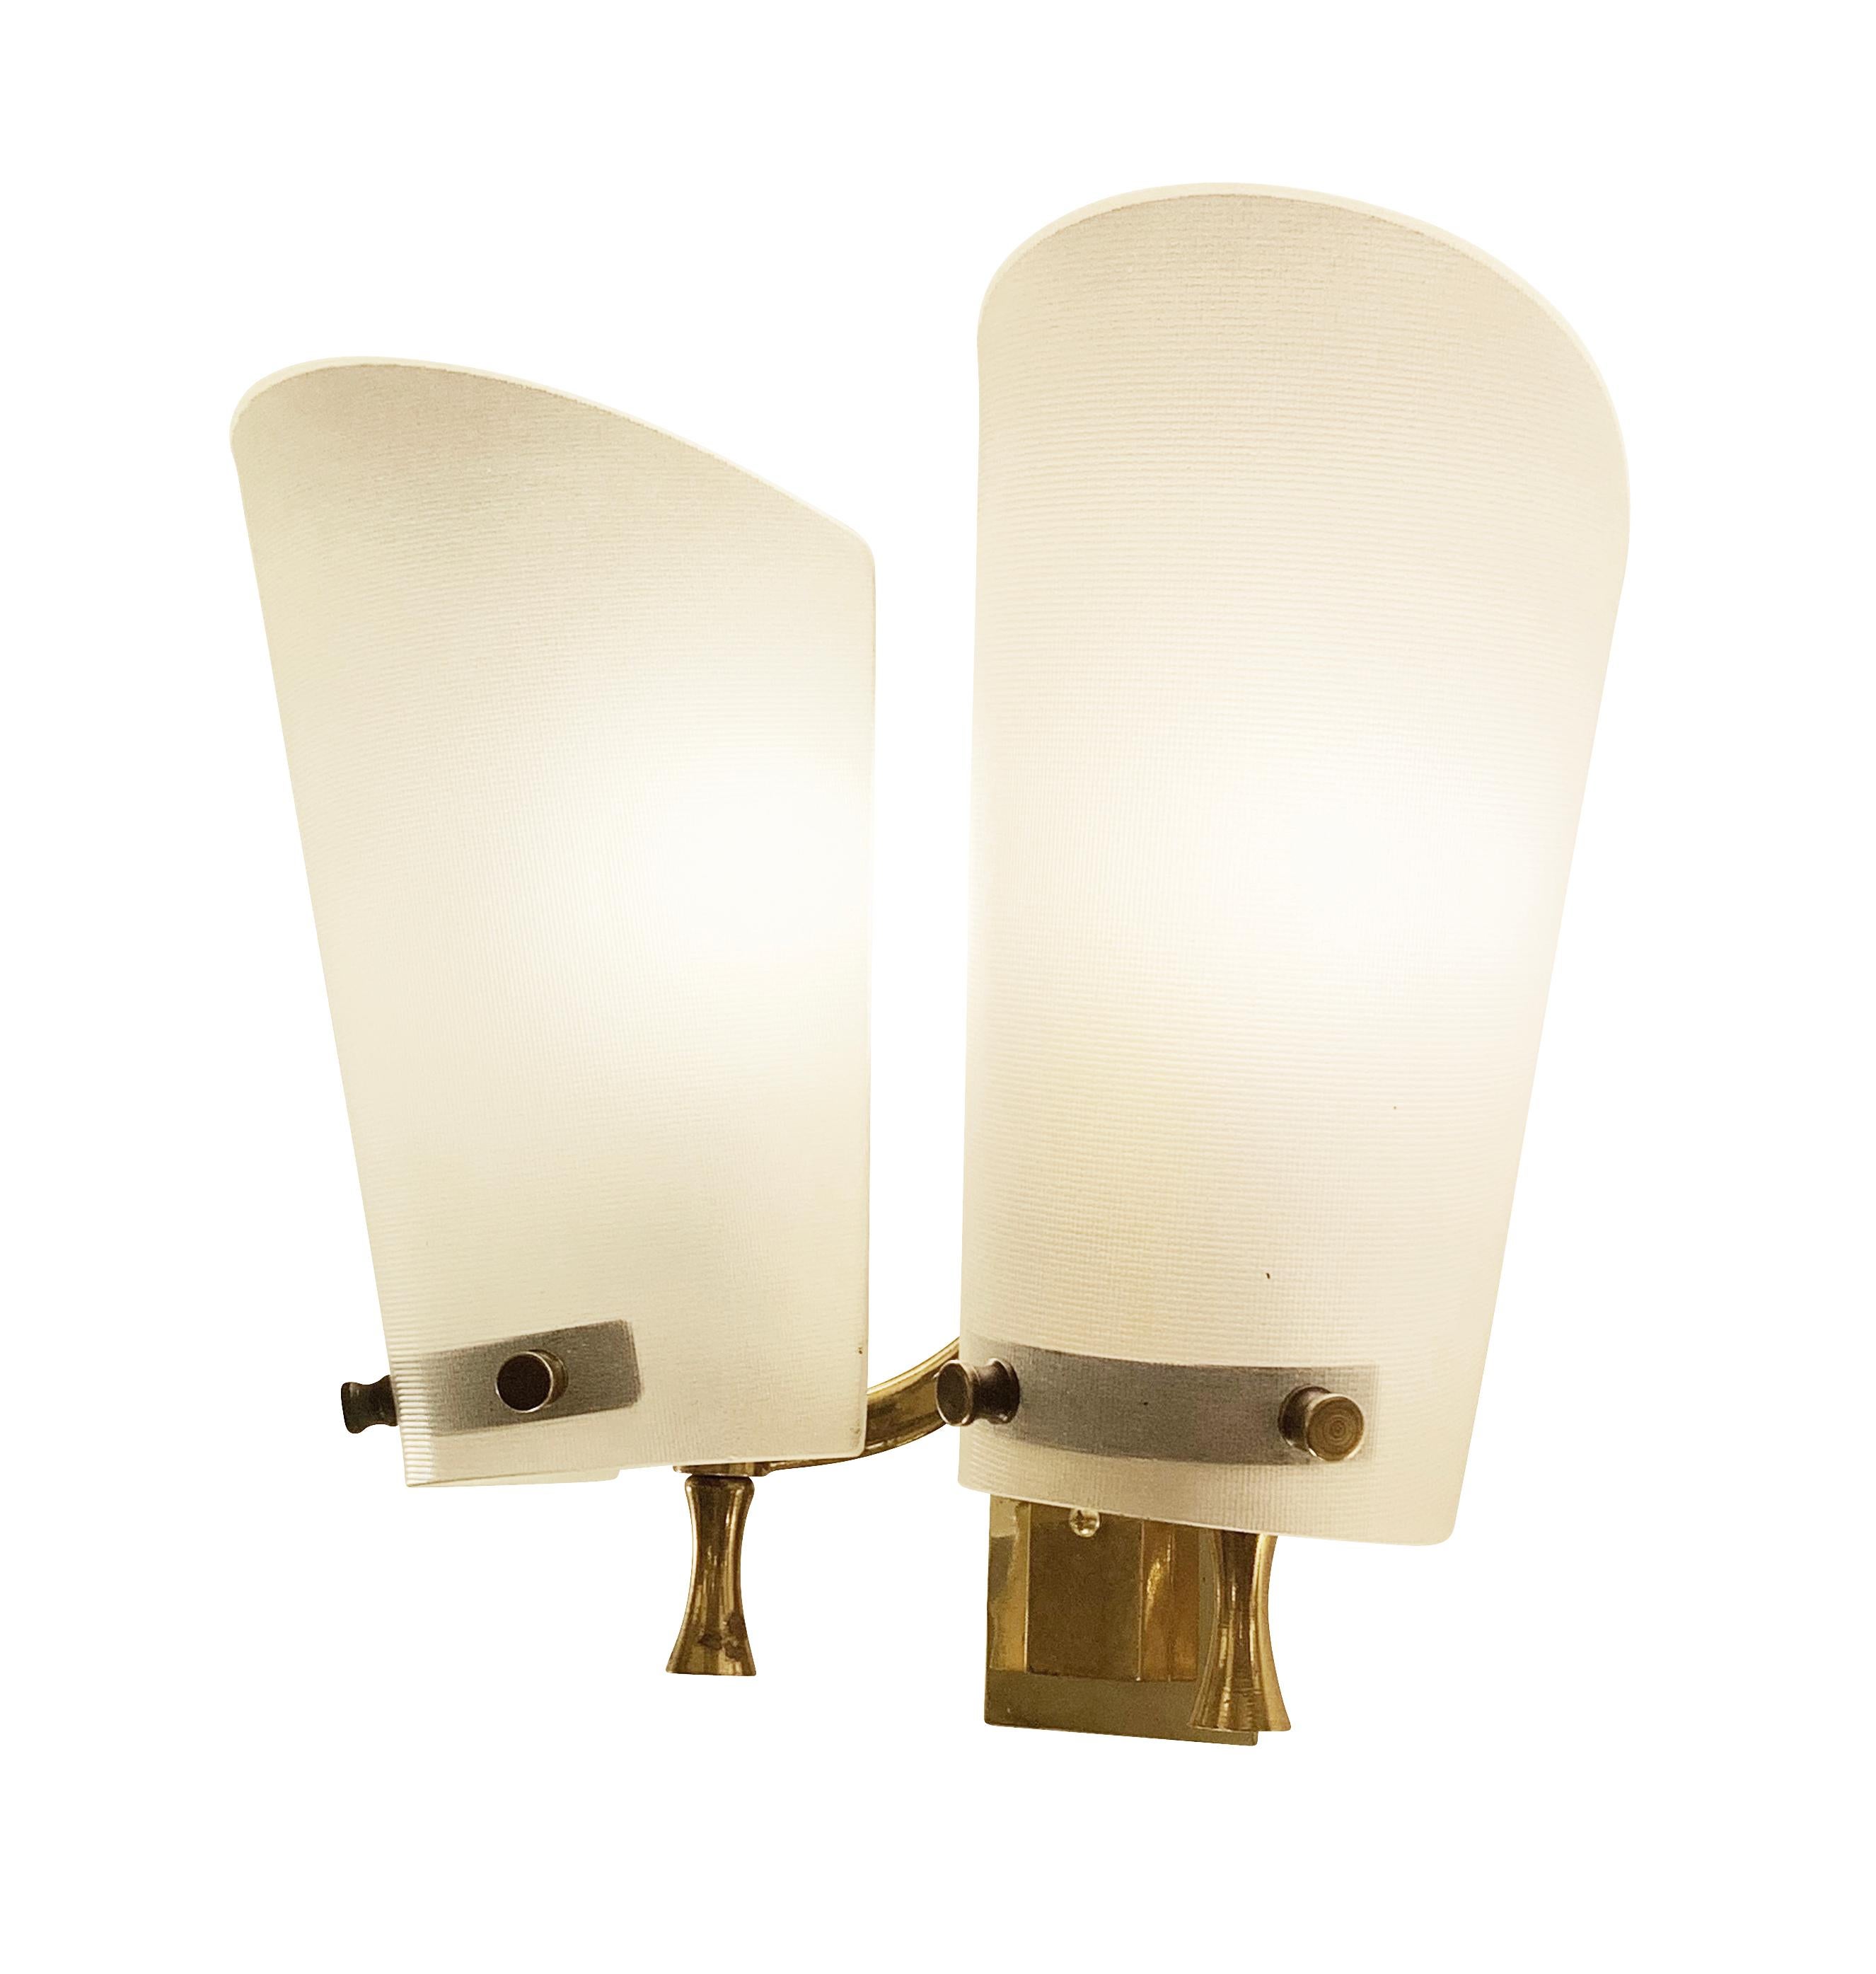 Pair of Italian Mid-Century wall lights each with two textured glass shades on a cast brass frame.

Condition: Excellent vintage condition, minor wear consistent with age and use.

Height: 9”

Width: 10”

Depth: 5.5”

Ref#: LTZ2002